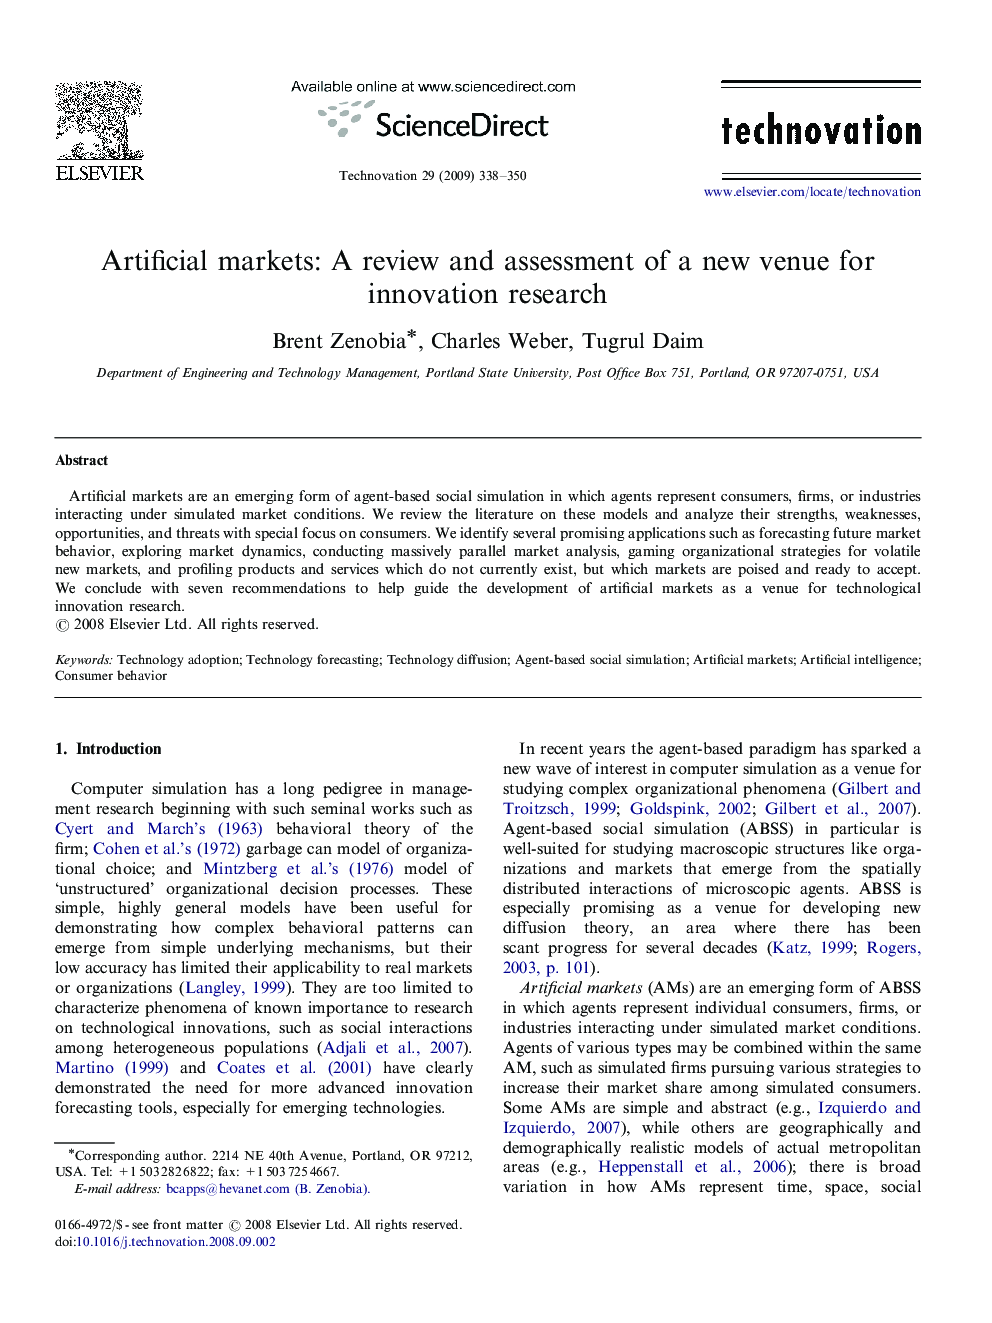 Artificial markets: A review and assessment of a new venue for innovation research